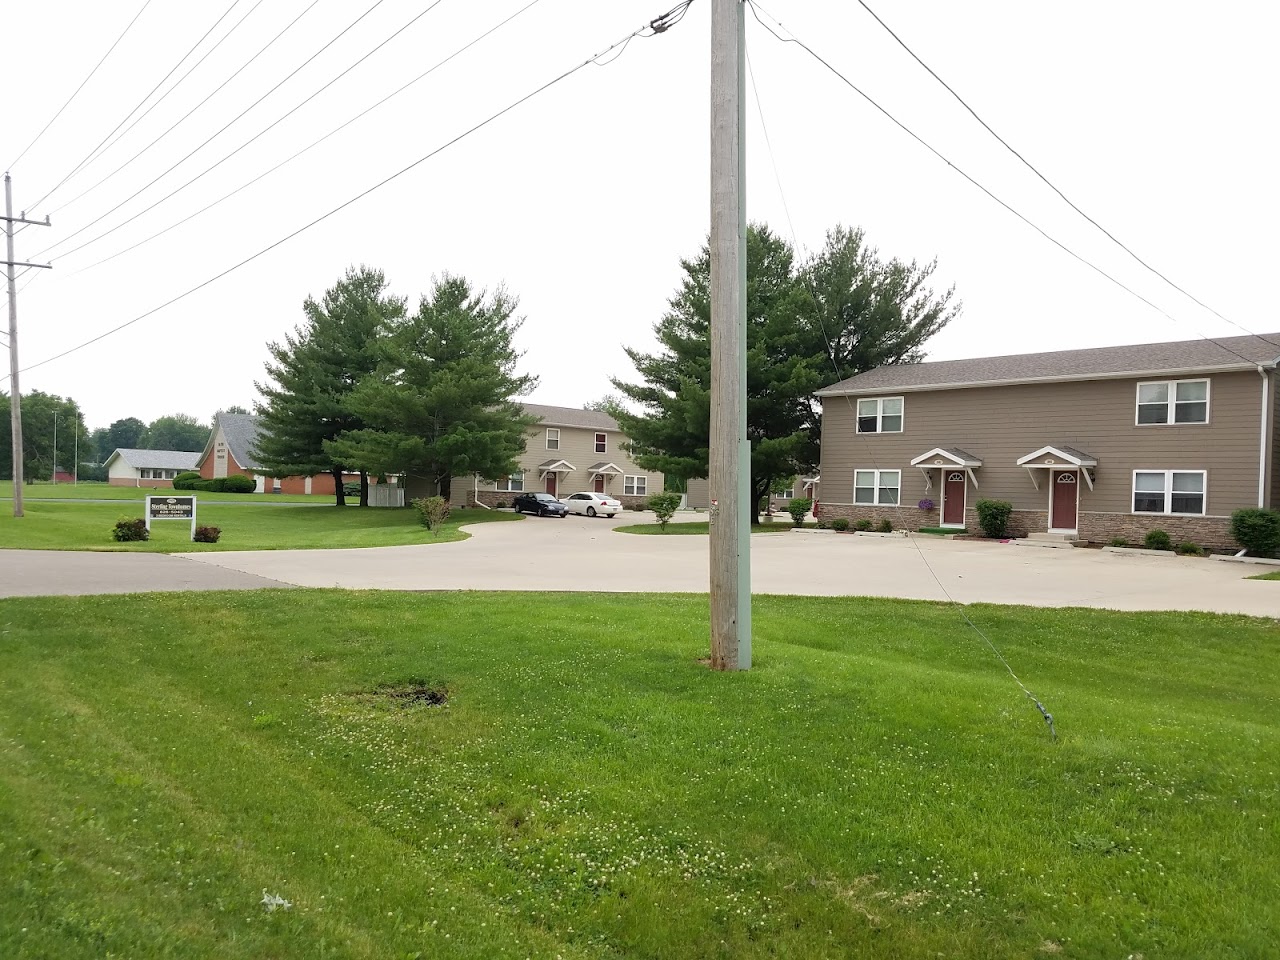 Photo of STERLING FAMILY HOUSING. Affordable housing located at 2105 FREEPORT RD STERLING, IL 61081